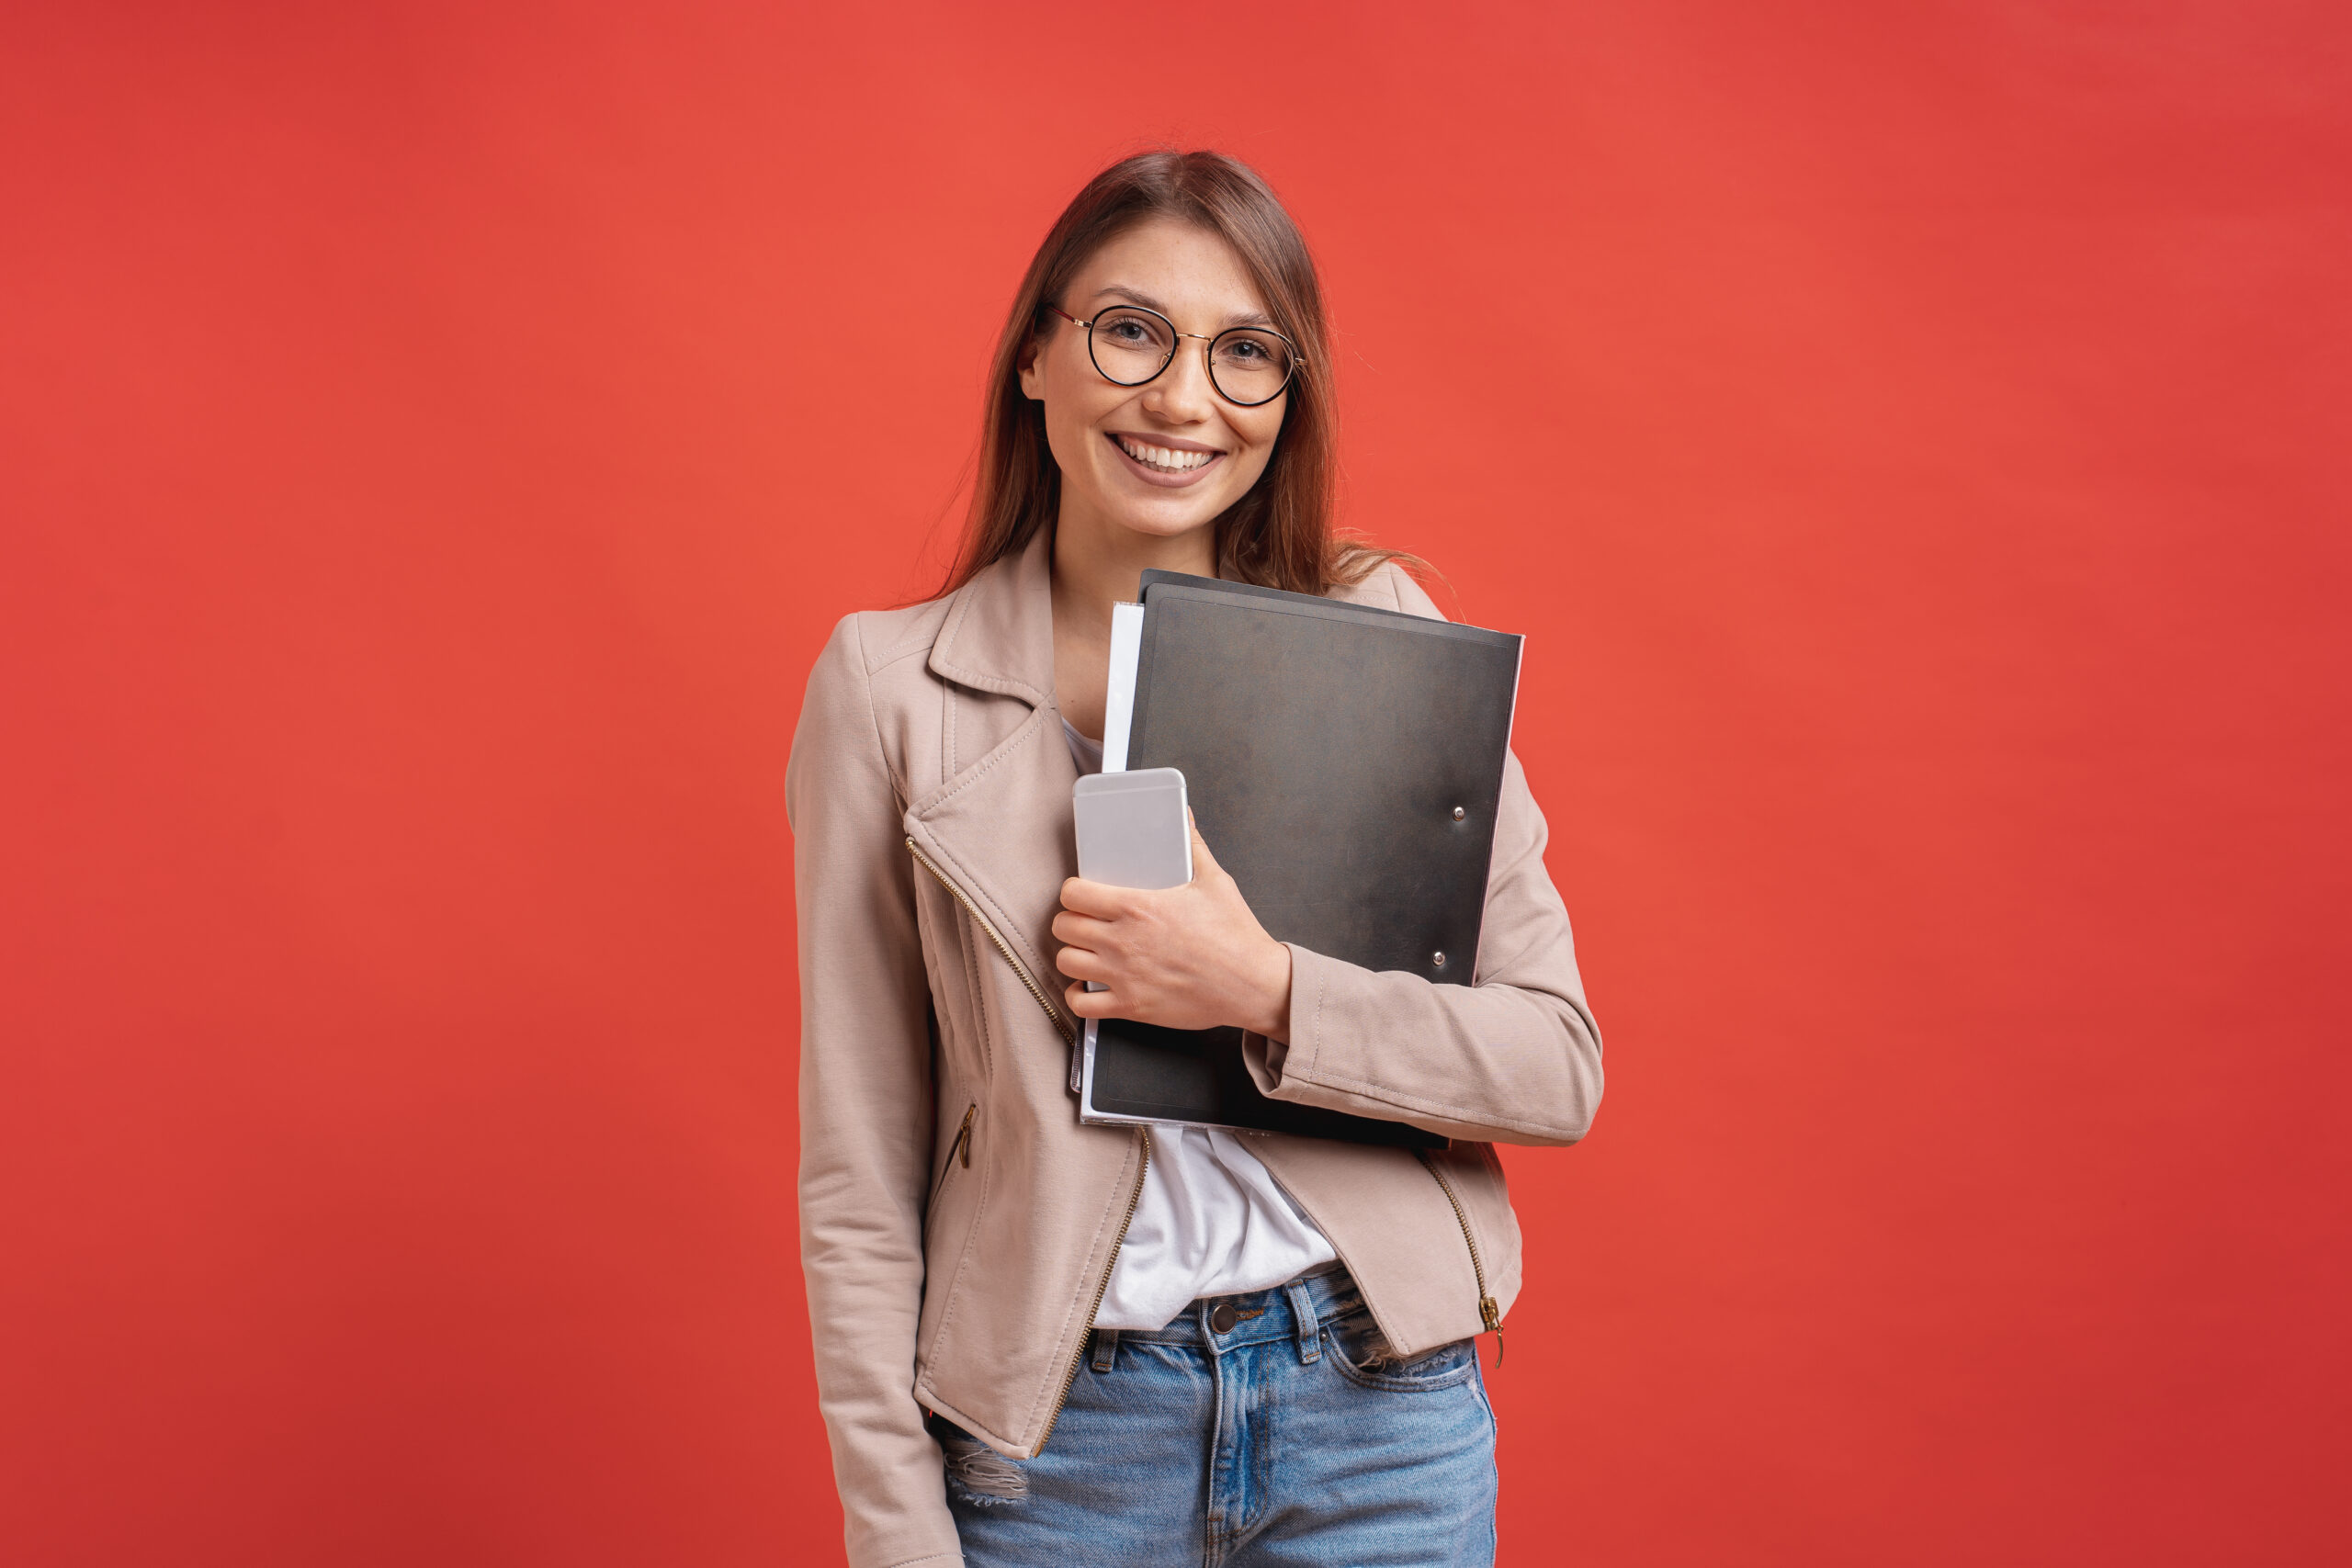 Young smiling student or intern in eyeglasses standing with a folder in hands and happily looking to camera over red background in the studio.